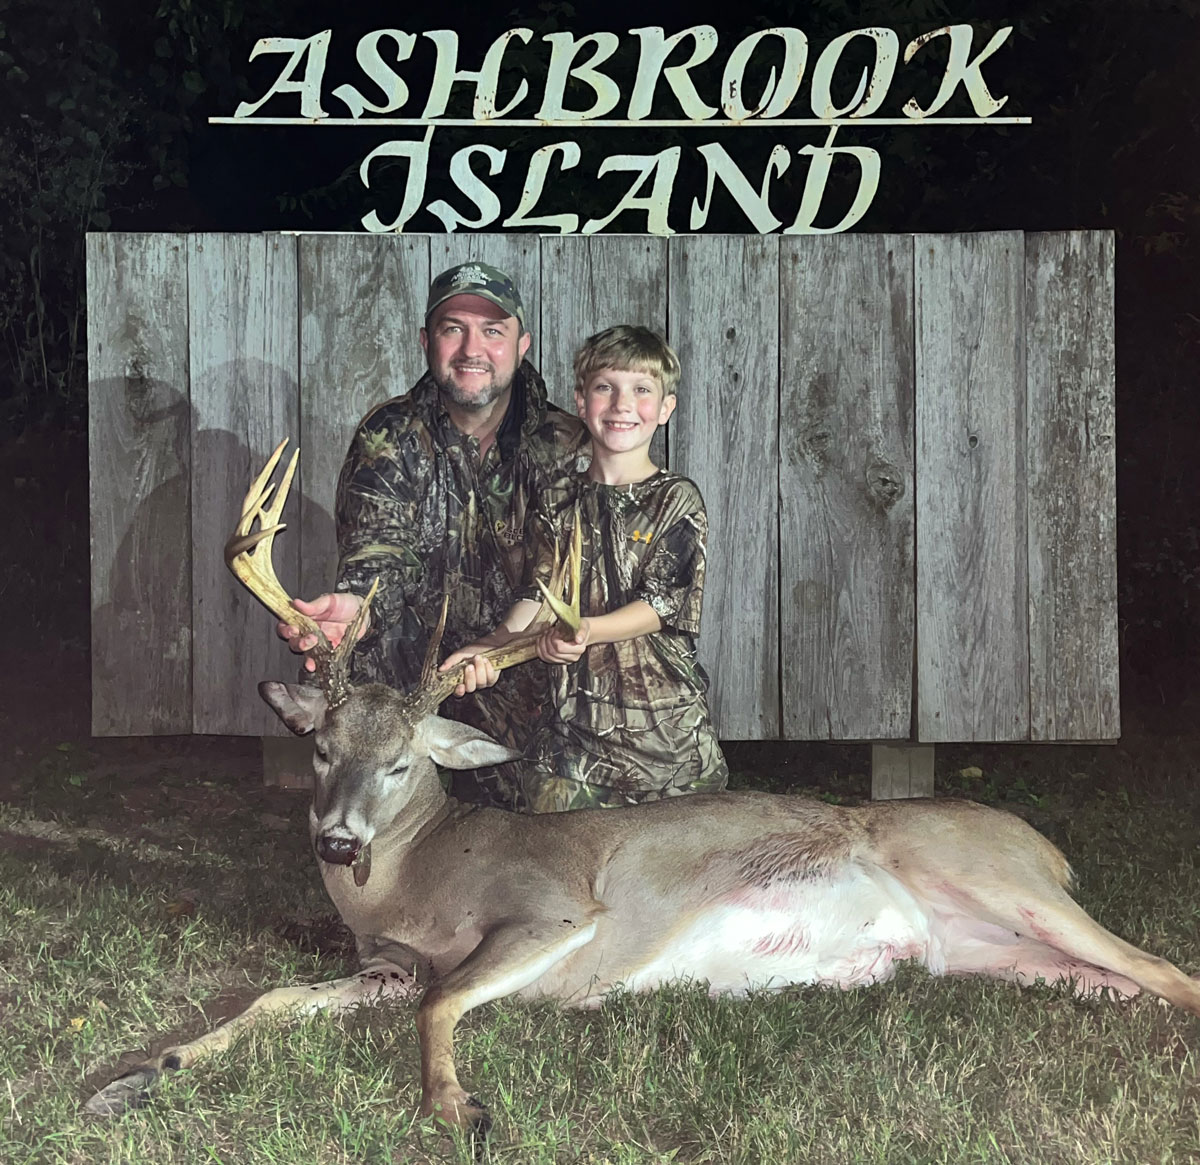 Michael O’Neal got some help from his son, Wesley, to take down this 12-point trophy buck on Ashbrook Island.